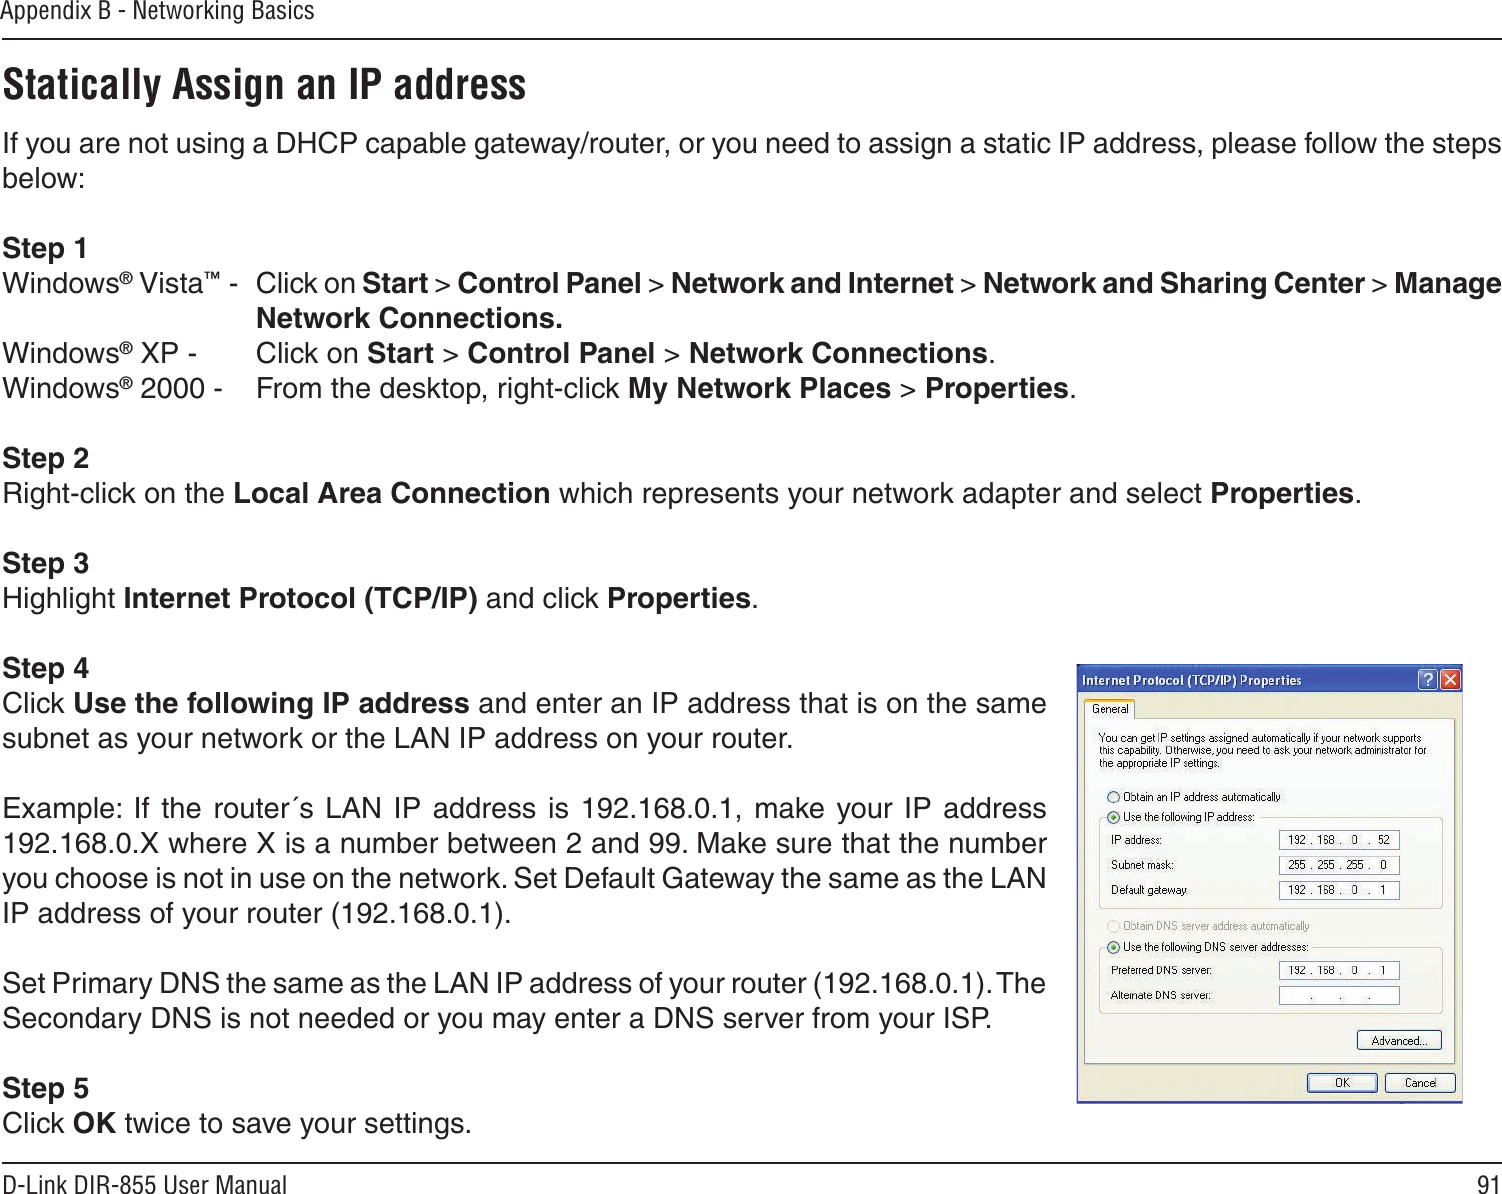 91D-Link DIR-855 User ManualAppendix B - Networking BasicsStatically Assign an IP addressIf you are not using a DHCP capable gateway/router, or you need to assign a static IP address, please follow the steps below:Step 1Windows® Vista™ -  Click on Start &gt; Control Panel &gt; Network and Internet &gt; Network and Sharing Center &gt; Manage Network Connections.Windows® XP -  Click on Start &gt; Control Panel &gt; Network Connections.Windows® 2000 -  From the desktop, right-click My Network Places &gt; Properties.Step 2Right-click on the Local Area Connection which represents your network adapter and select Properties.Step 3Highlight Internet Protocol (TCP/IP) and click Properties.Step 4Click Use the following IP address and enter an IP address that is on the same subnet as your network or the LAN IP address on your router. Example:  If the router´s LAN  IP  address  is 192.168.0.1, make  your IP address 192.168.0.X where X is a number between 2 and 99. Make sure that the number you choose is not in use on the network. Set Default Gateway the same as the LAN IP address of your router (192.168.0.1). Set Primary DNS the same as the LAN IP address of your router (192.168.0.1). The Secondary DNS is not needed or you may enter a DNS server from your ISP.Step 5Click OK twice to save your settings.